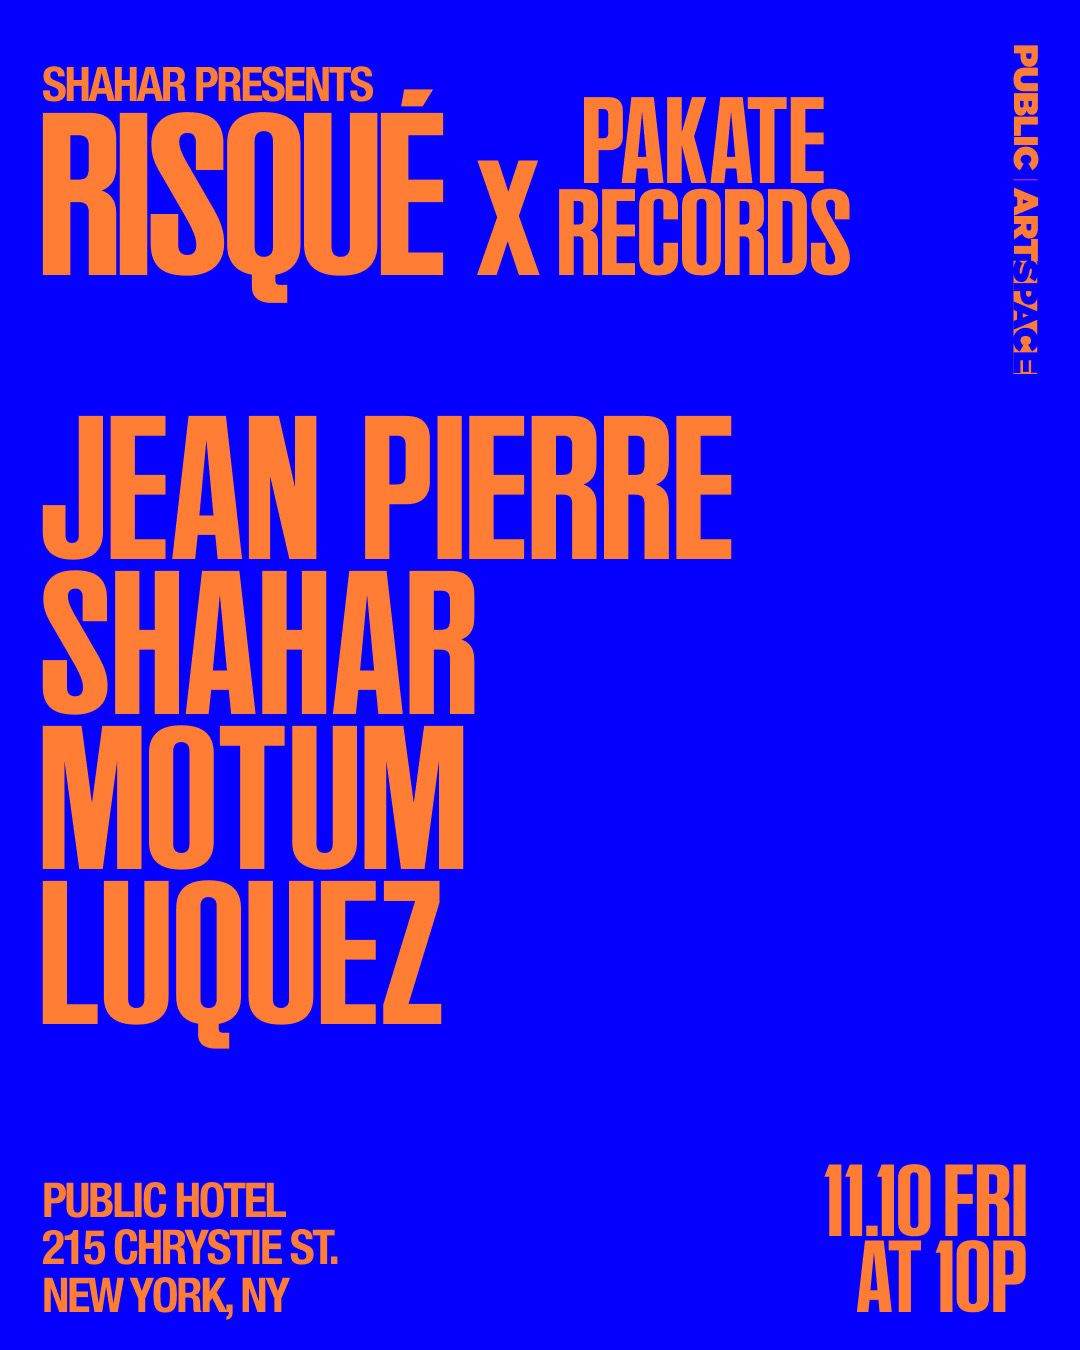 Risqué X Pakate Records at  Public Hotel - フライヤー表